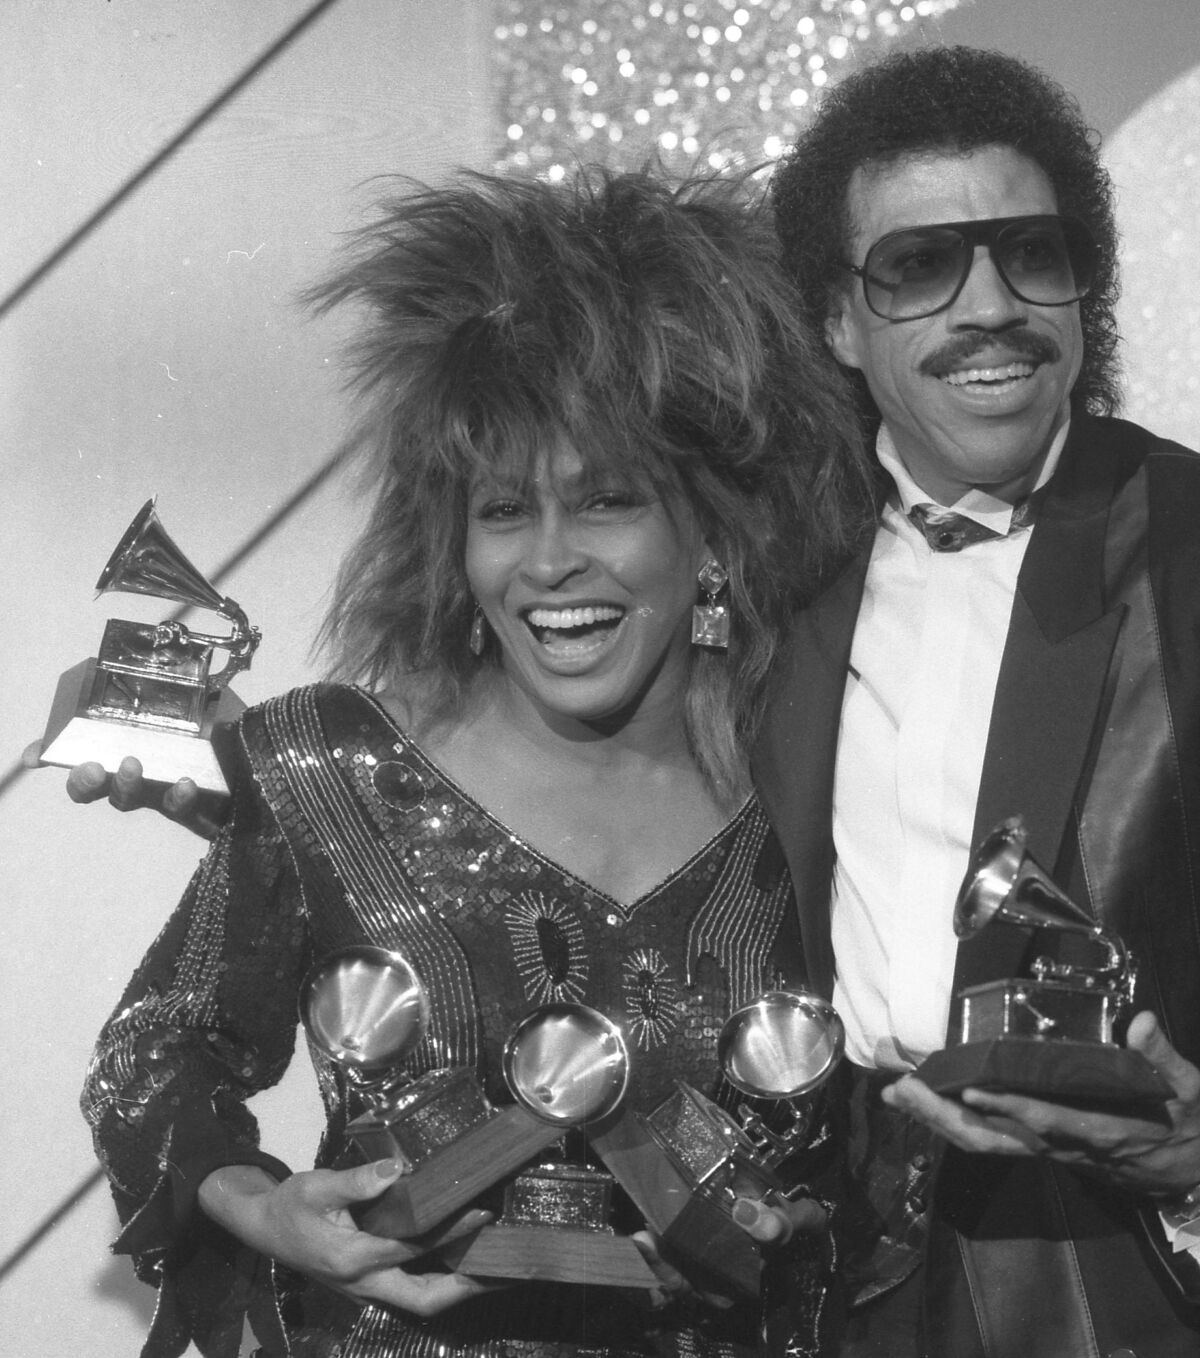 Tina Turner and Lionel Richie posing with their Grammy Awards